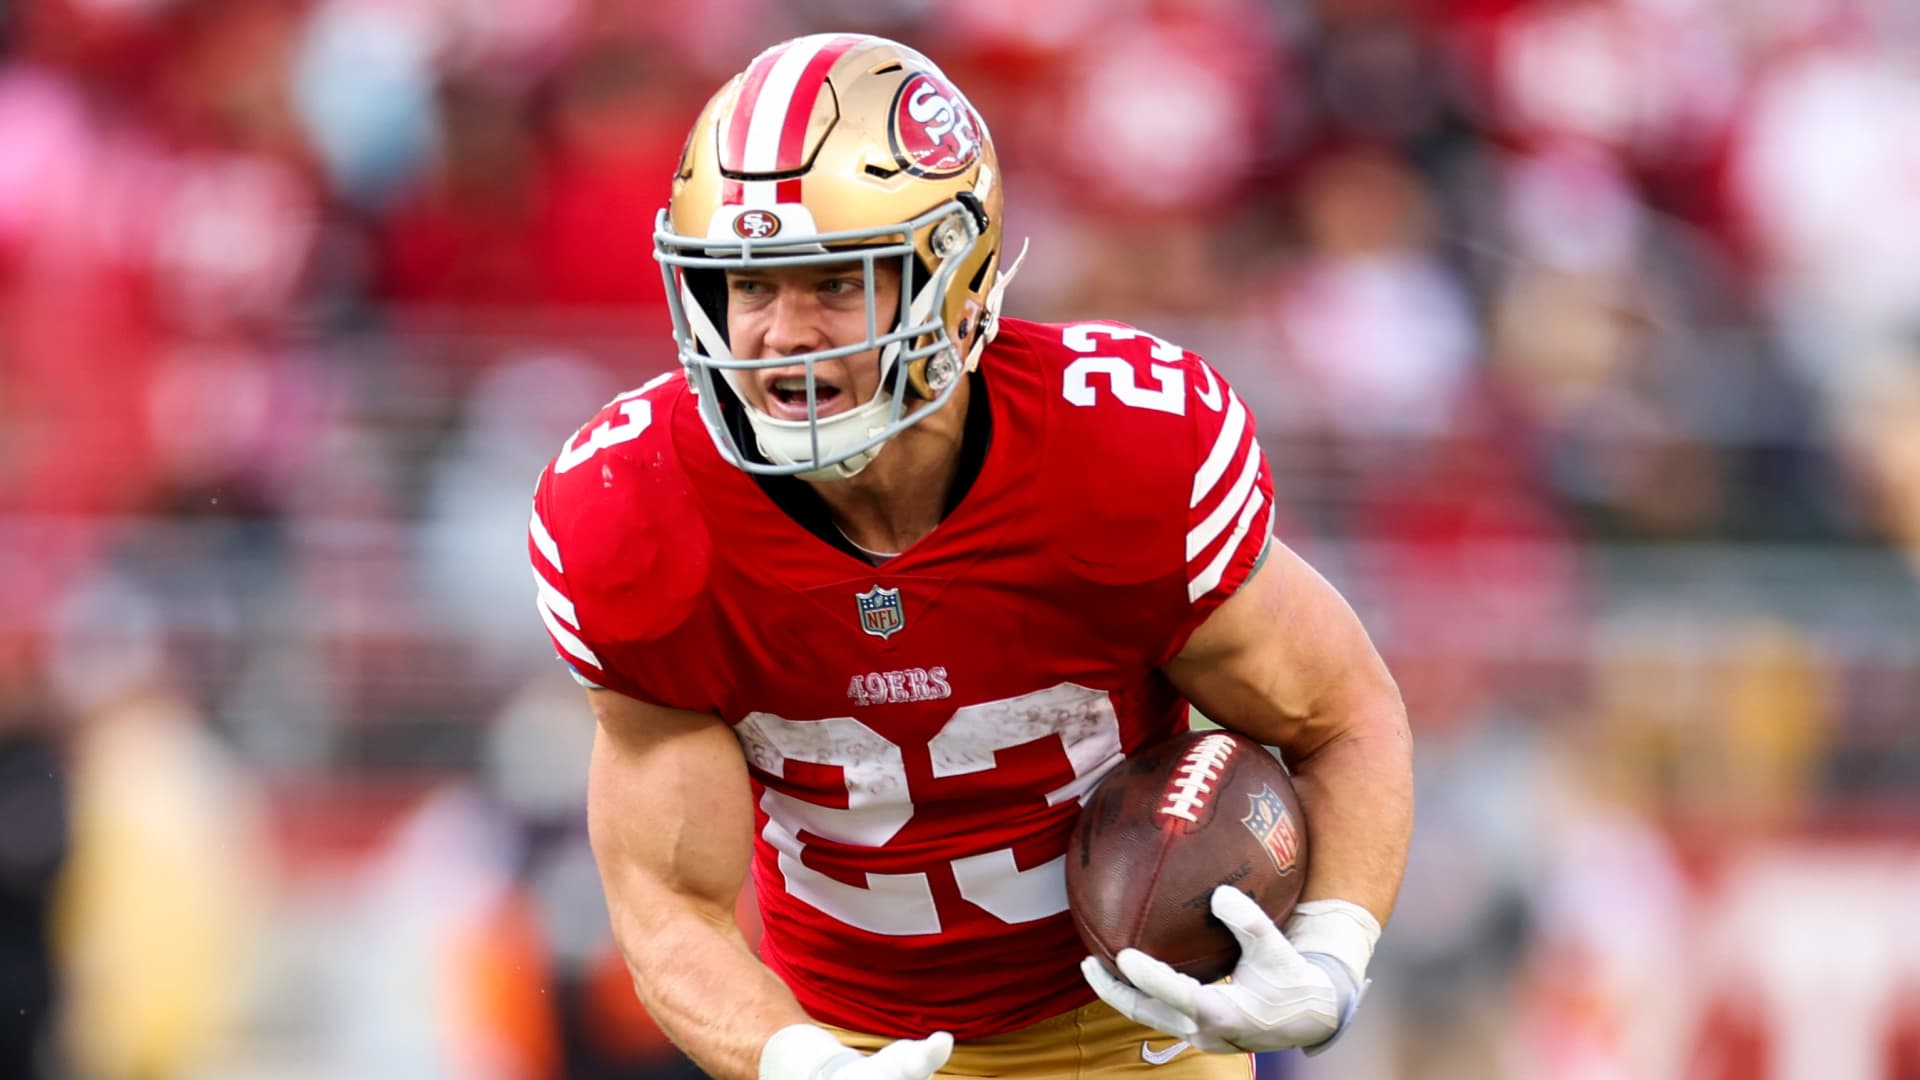 NFL star Christian McCaffrey on what drives his success: ‘There’s a lot of power in setting goals'